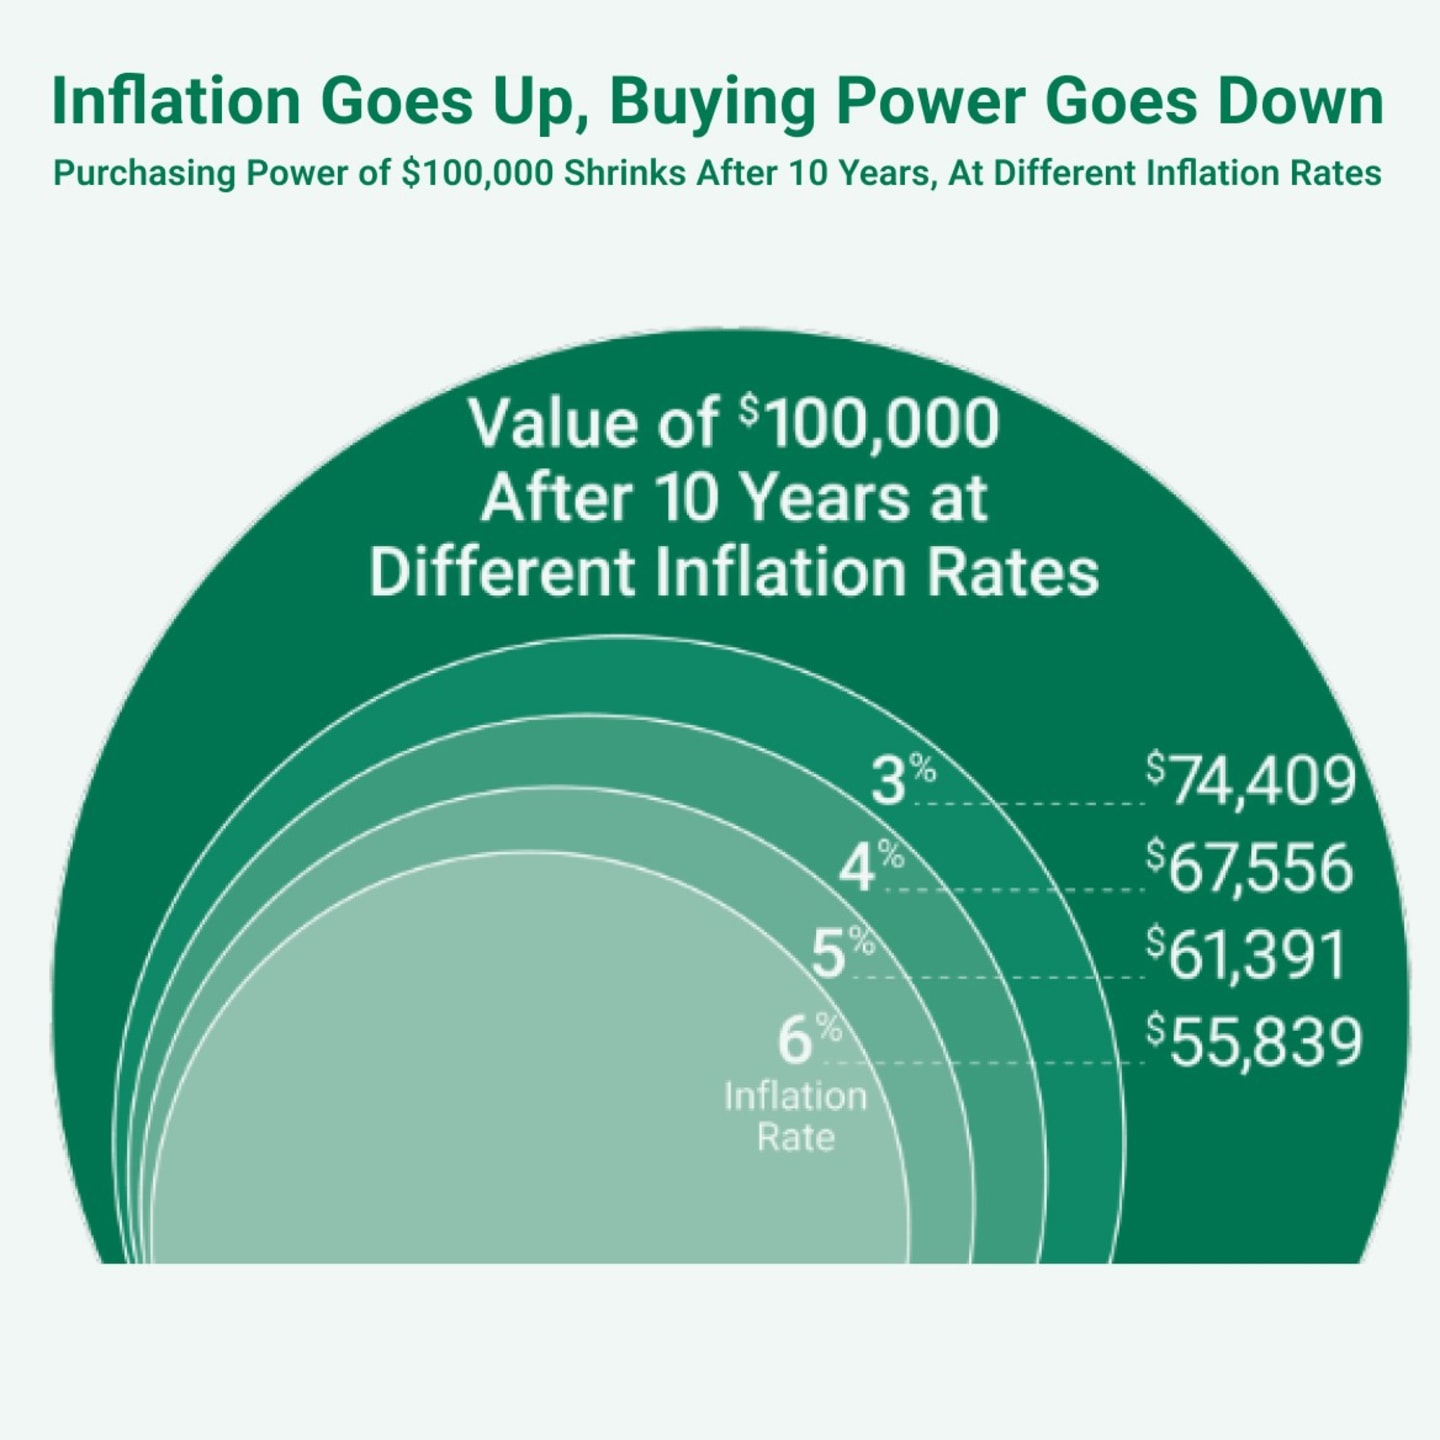 When Inflation Goes Up, Buying Power Goes Down. Value of $100,000 after 10 years at different inflation rates.